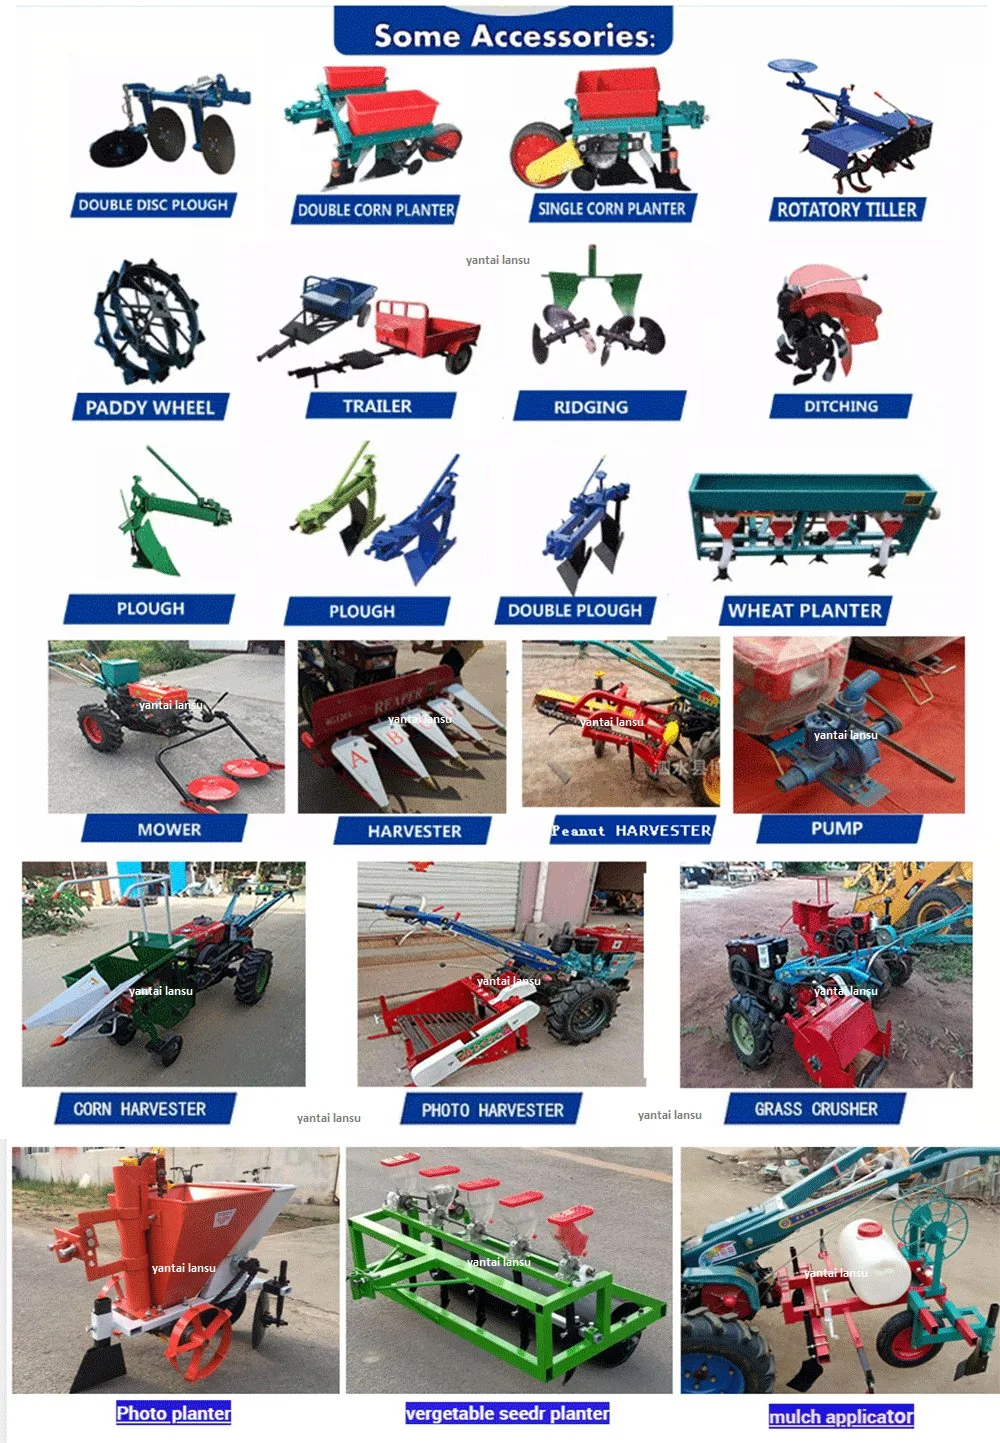 China Top Sale Farm Tractor Agricultural Tractor Competitive Price